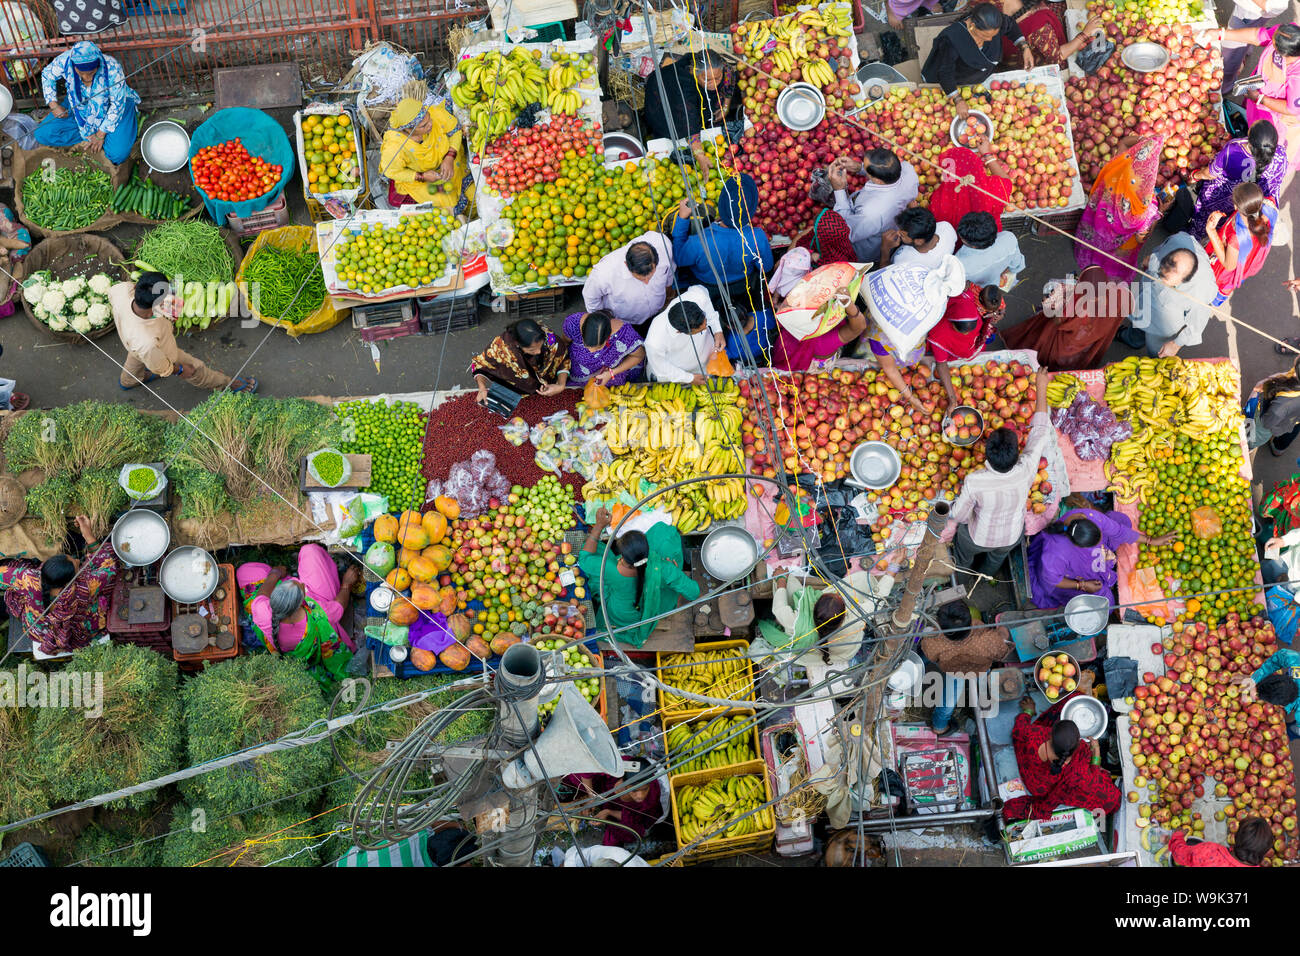 Fruit and vegetable market in the Old City, Udaipur, Rajasthan, India, Asia Stock Photo